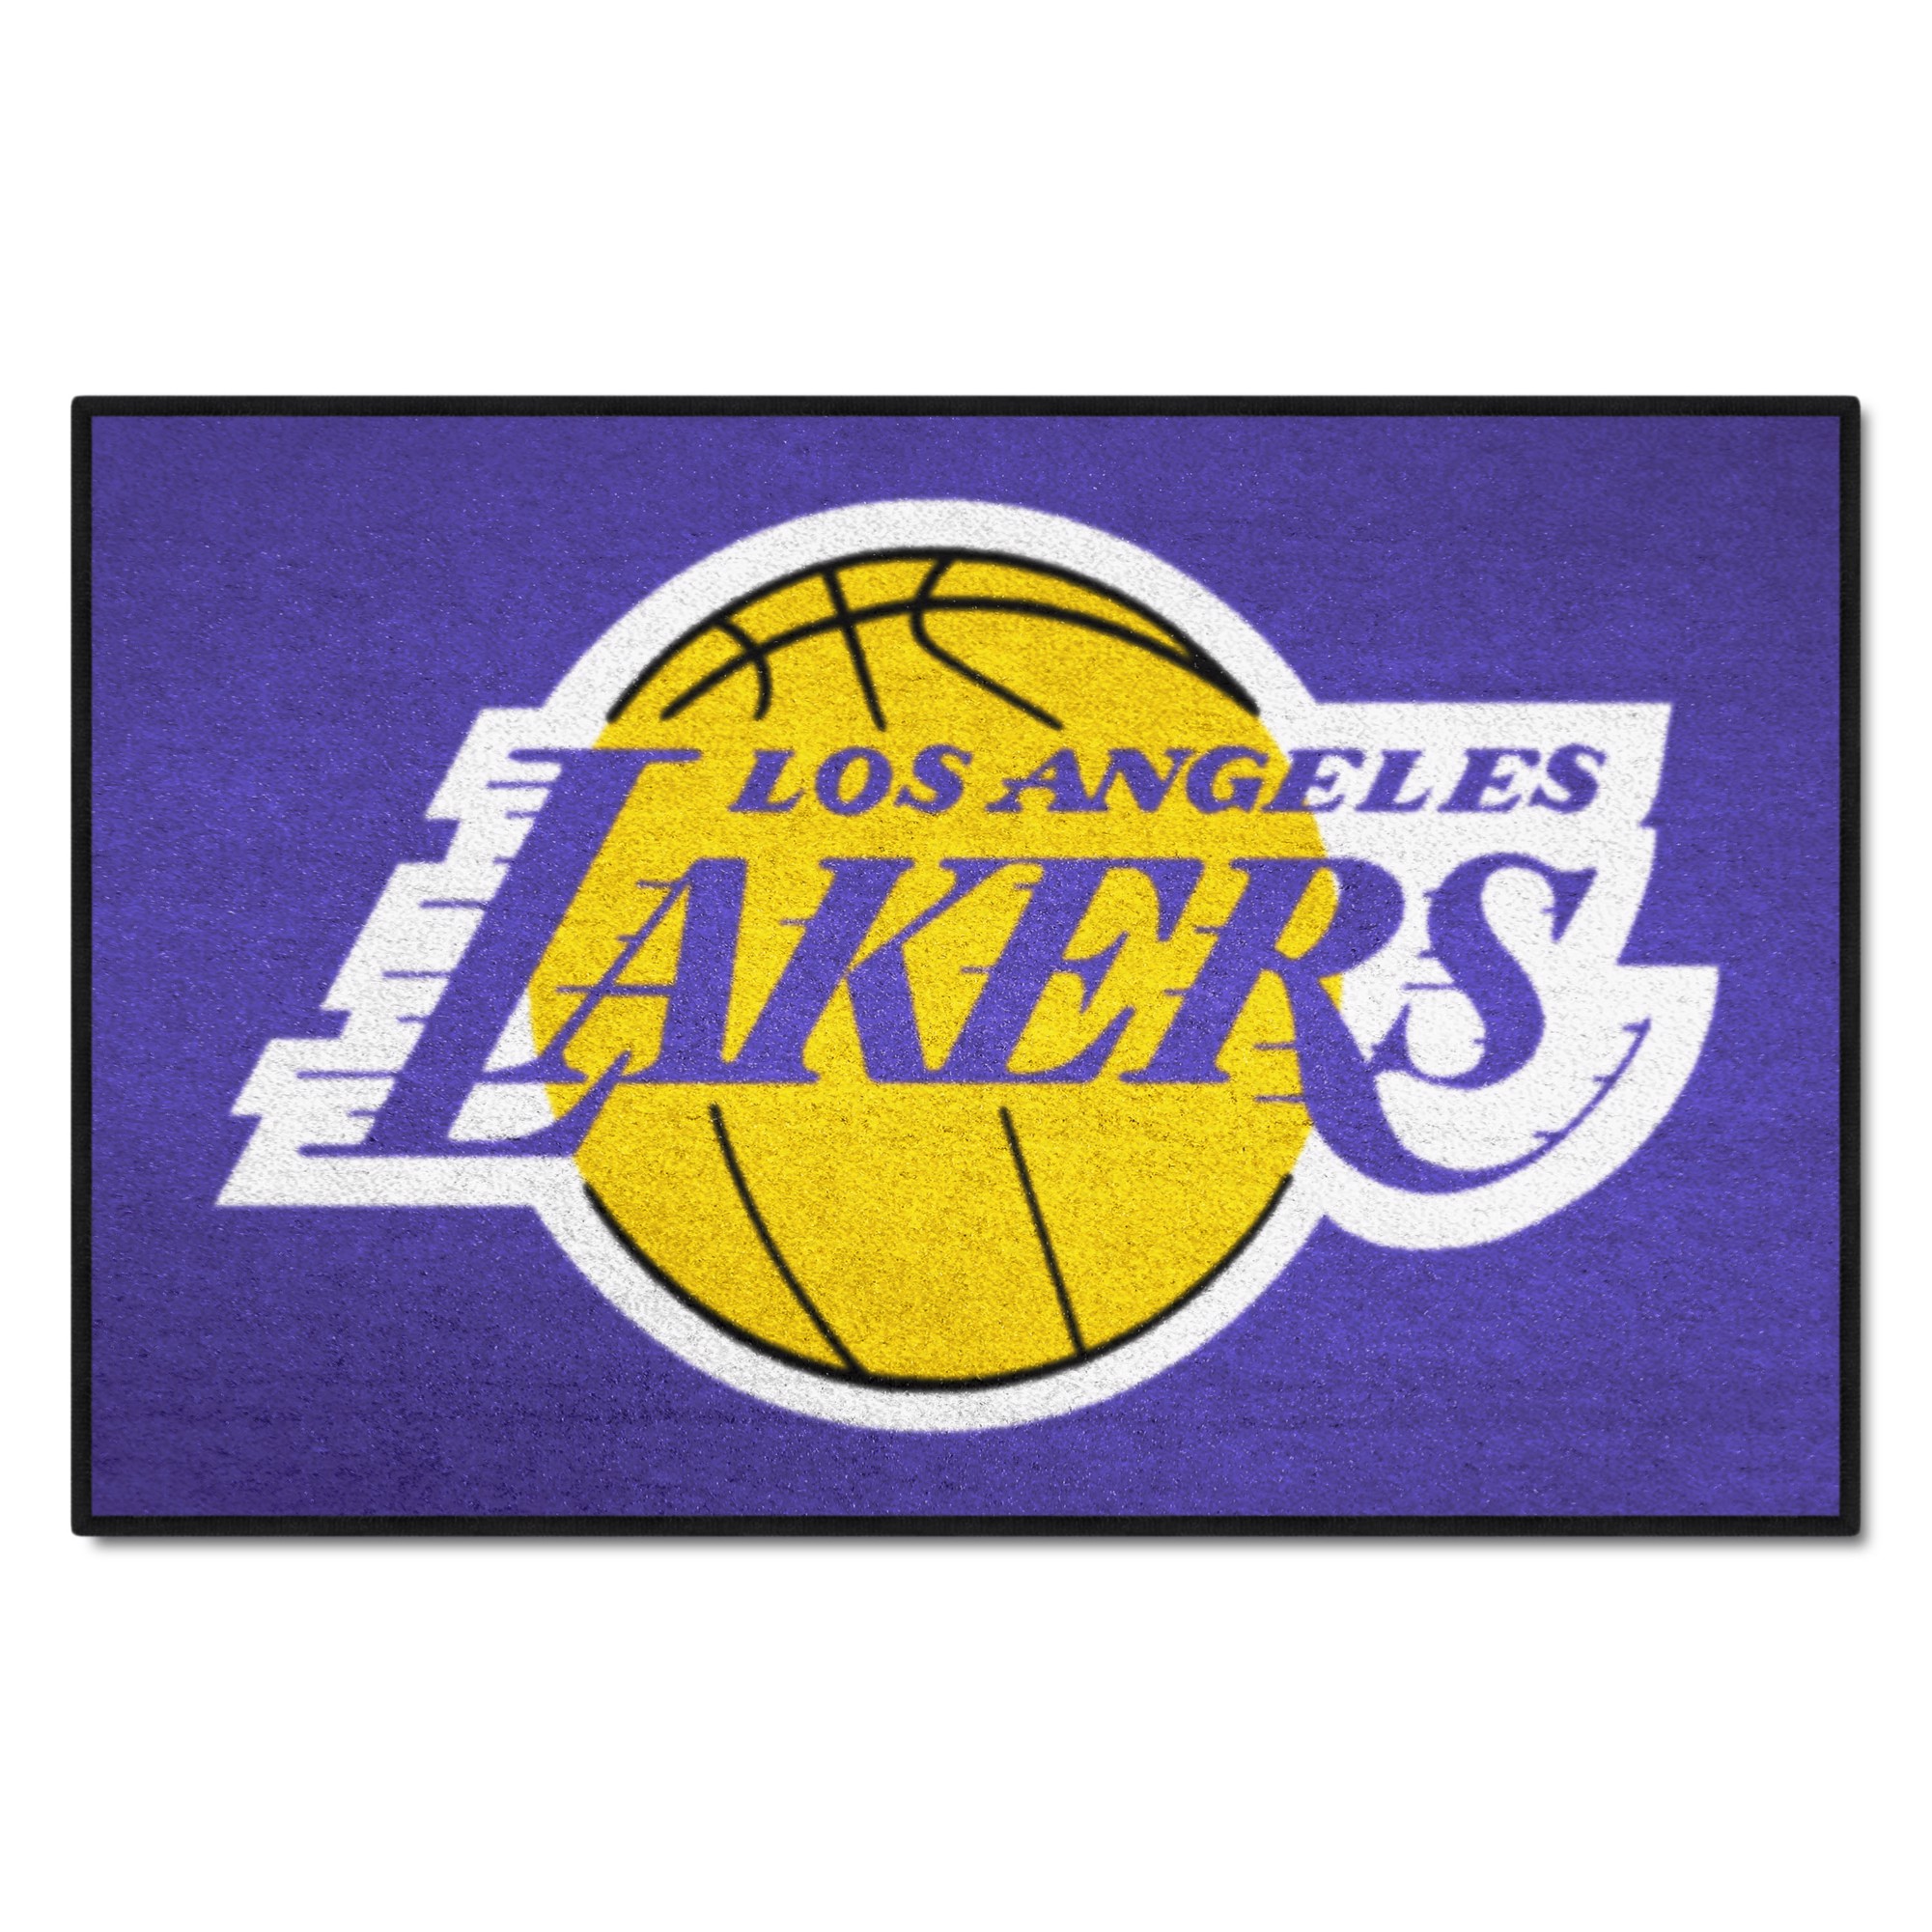 Officially Licensed NBA Los Angeles Lakers Uniform Rug 19 x 30